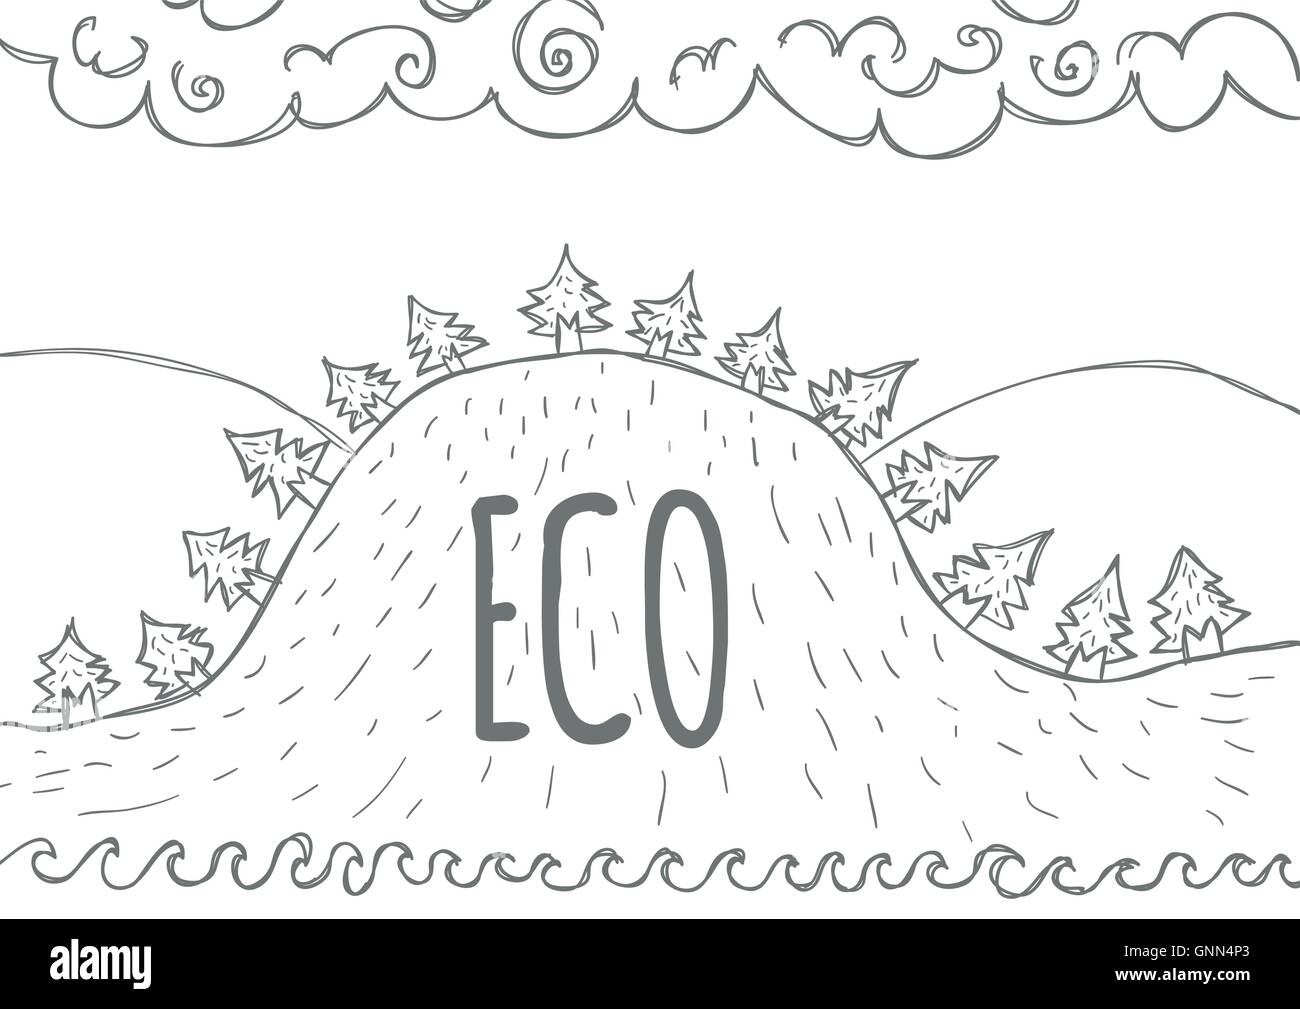 Doodle drawing of hill, with trees on it. You can also see waves at the bottom, clouds and text that says ECO. Stock Vector